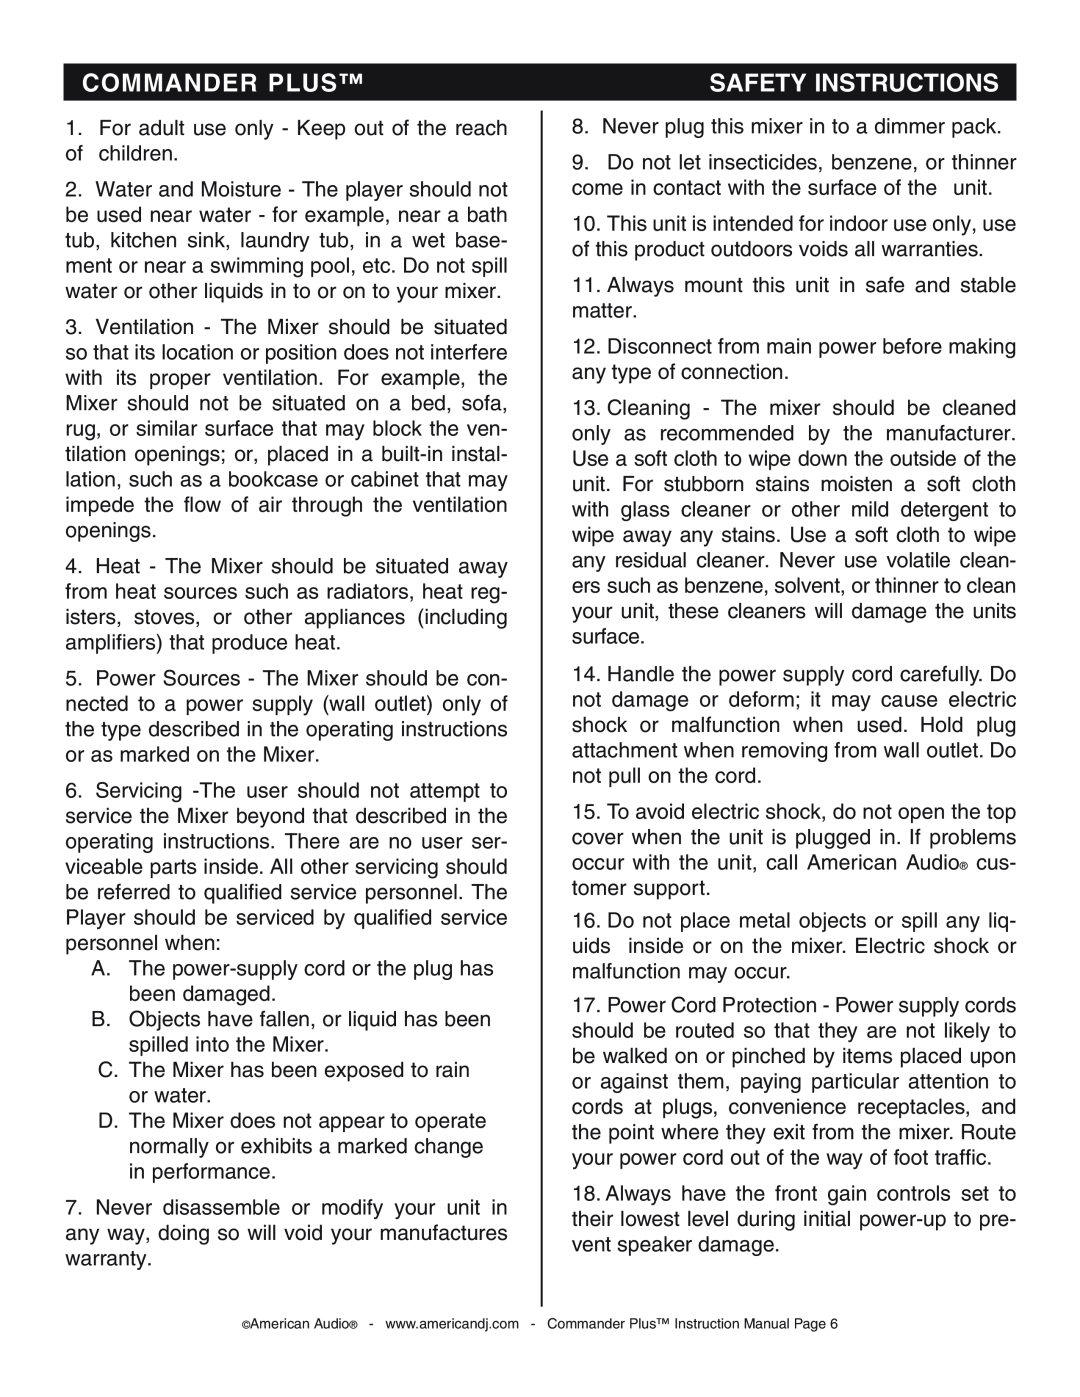 American Audio CommanderPlus manual Safety Instructions, Commander Plus 